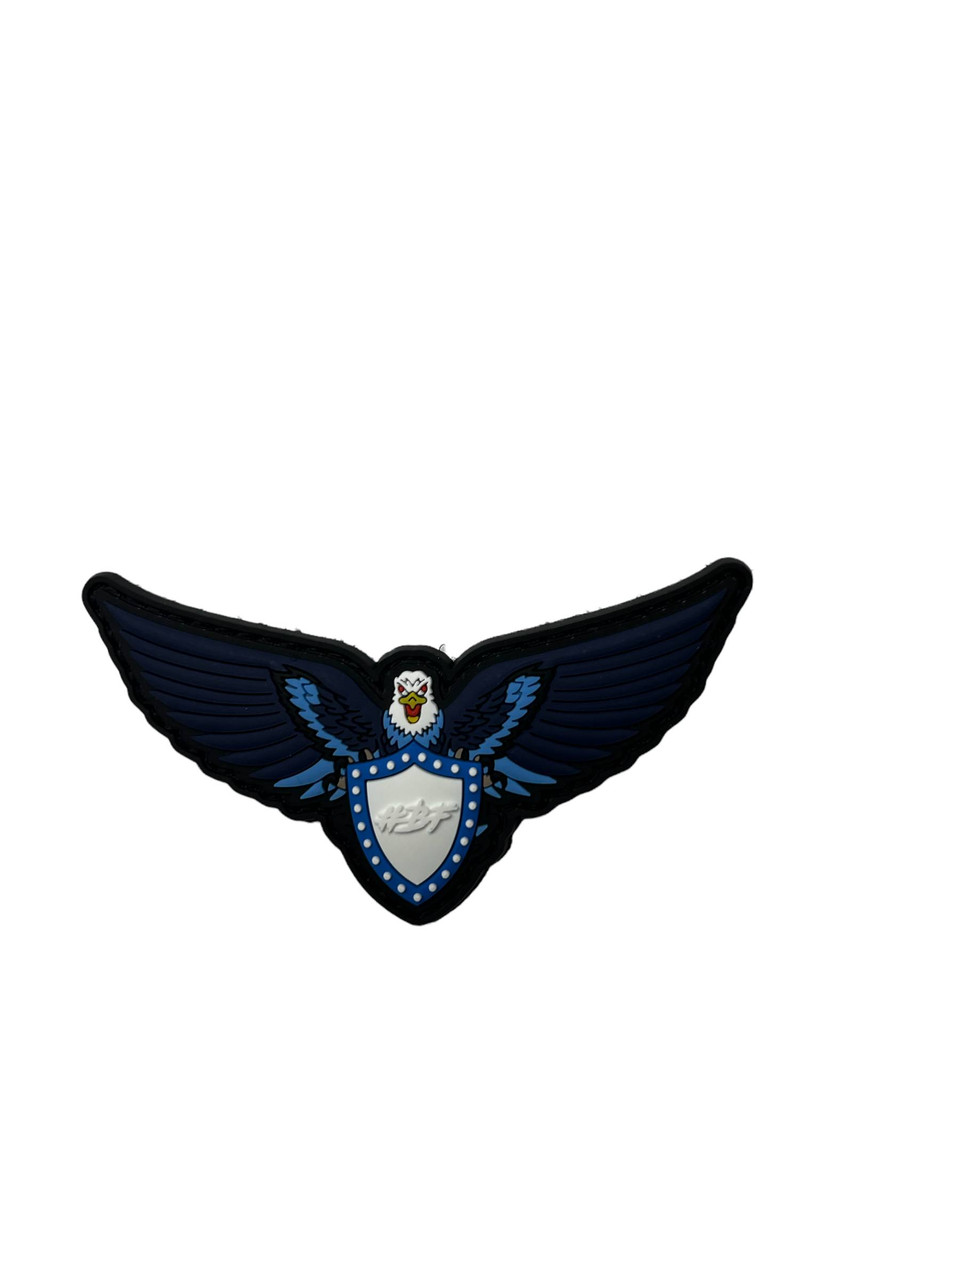 PVC Hook & Loop-Backed Medic Patch- Patch Only (Blue on Black)